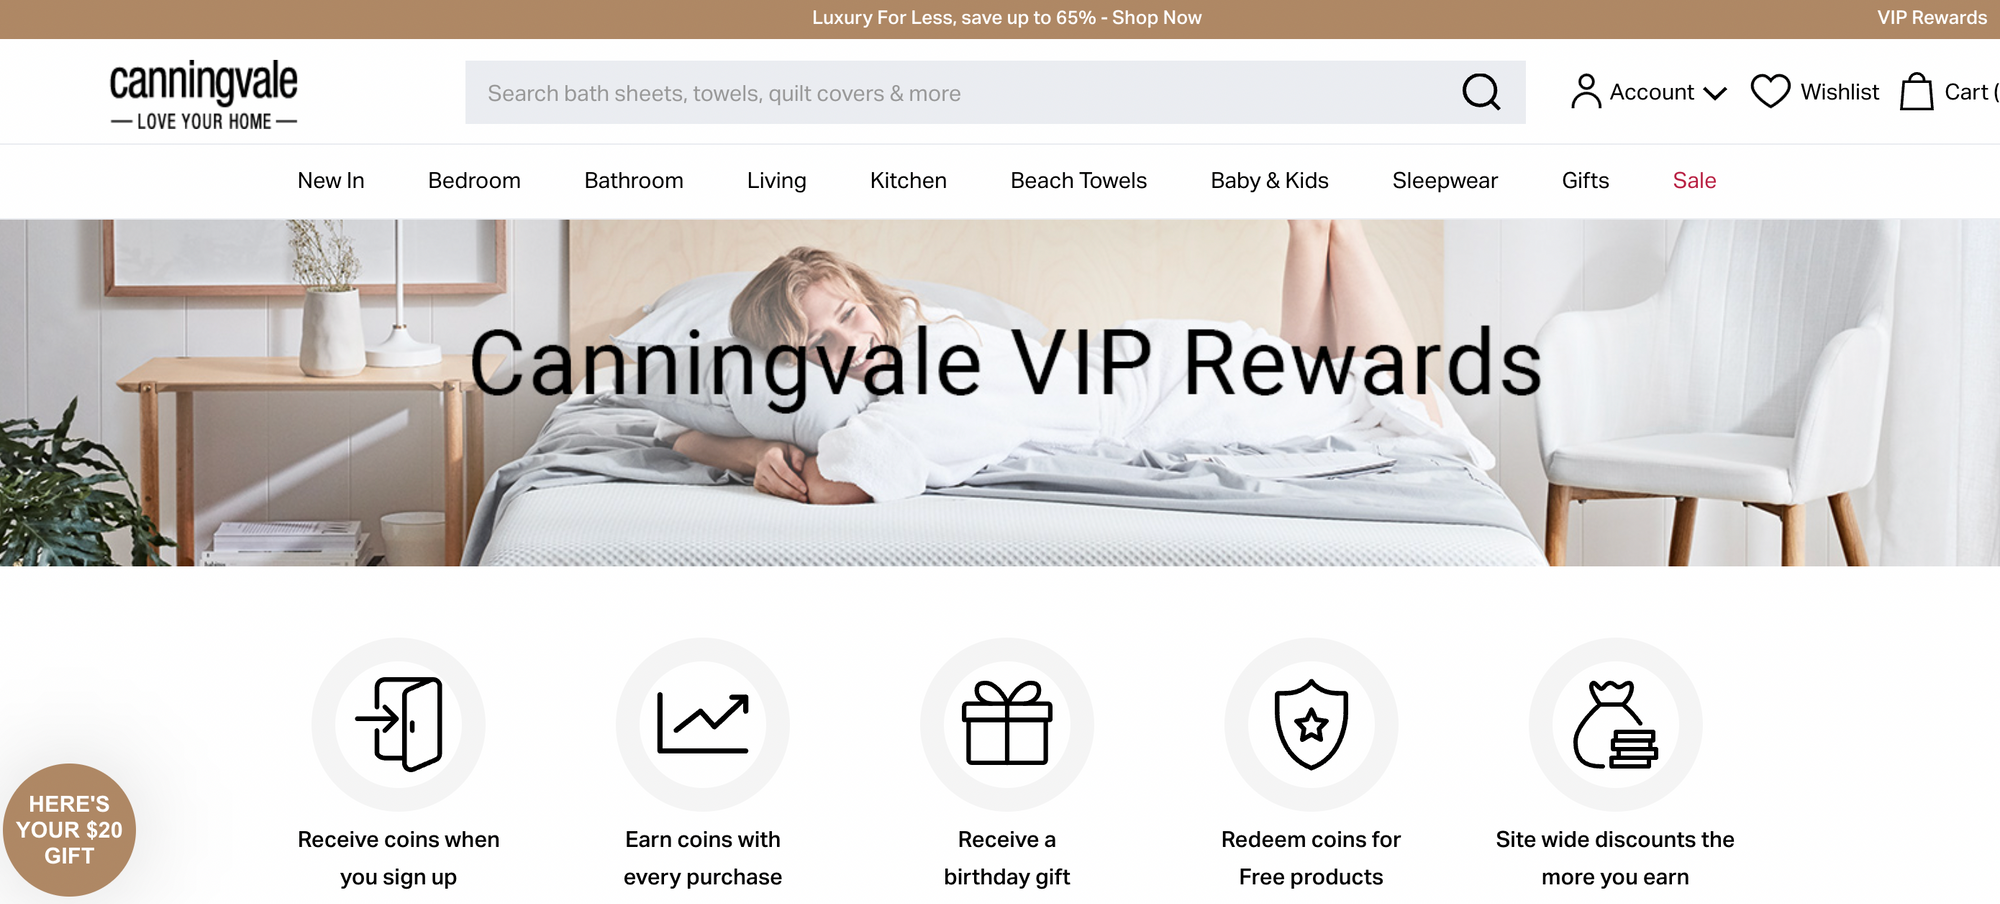 How Gamification Can Improve Your VIP Loyalty Program – A screenshot from Canningvale homeware VIP rewards program explainer page with text reading, “Canningvale VIP Rewards.” 